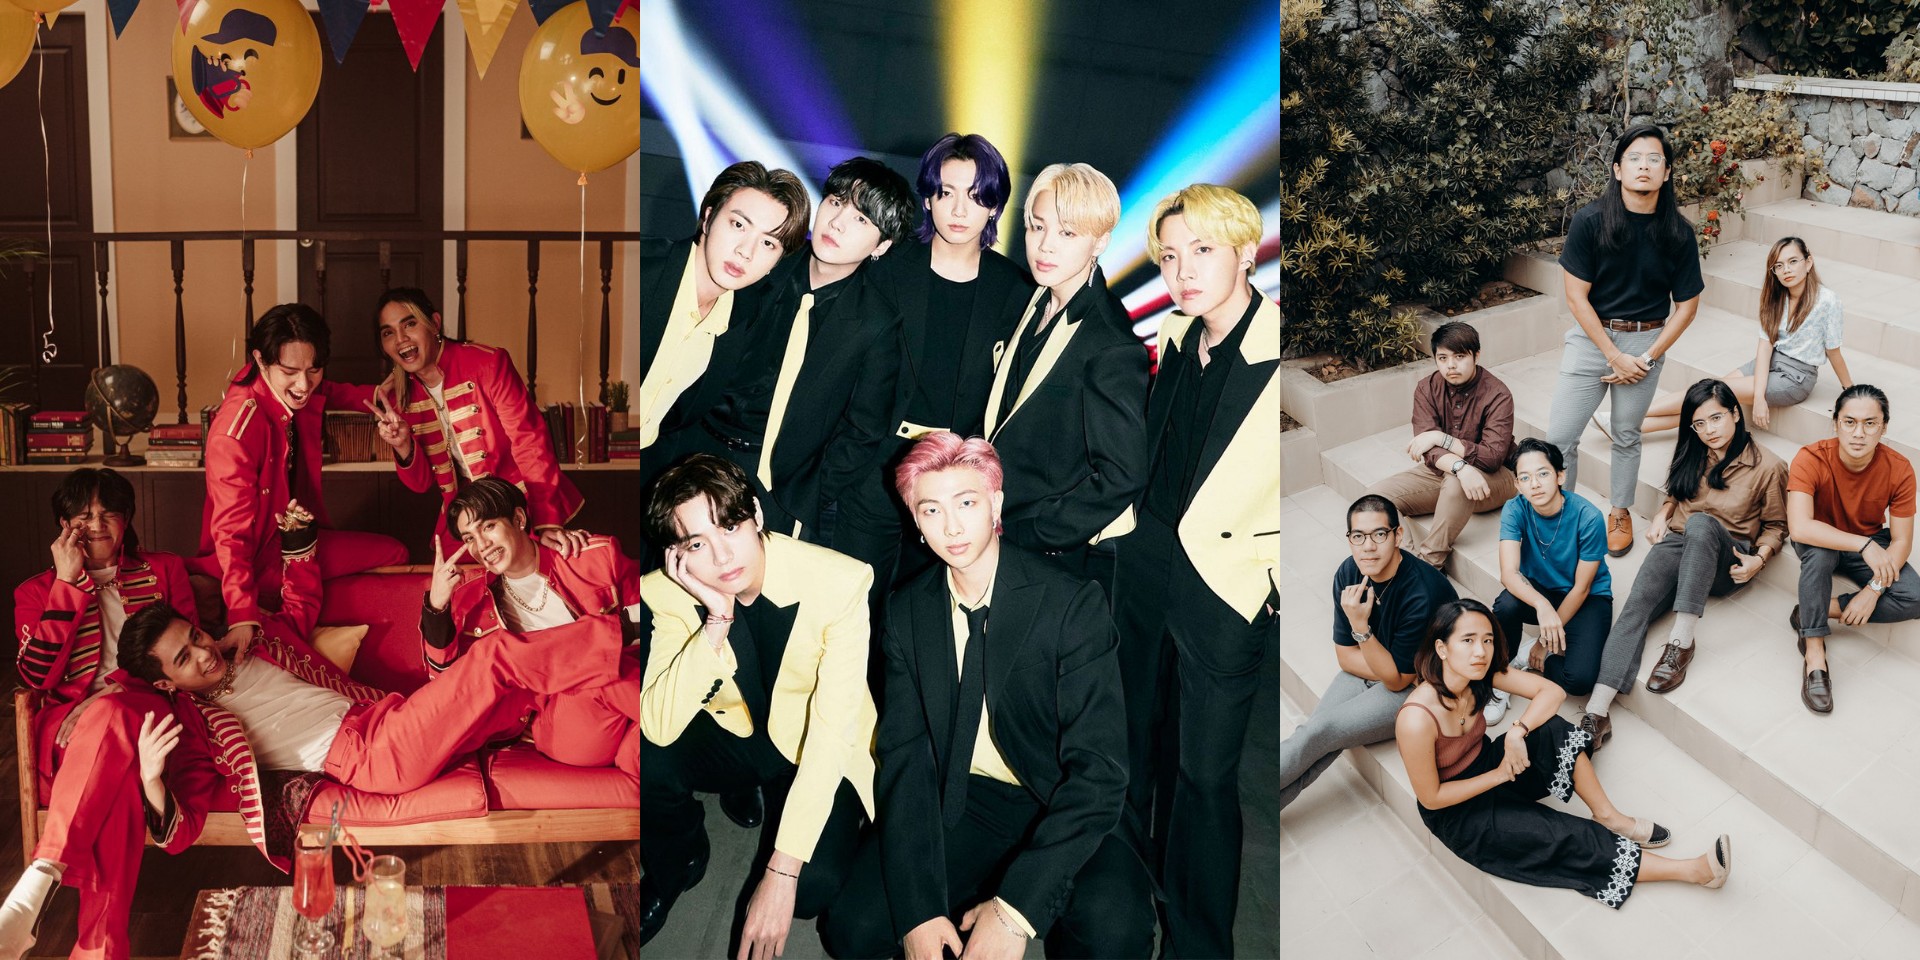 MYX Awards 2021 reveal winners, SB19, Ben&Ben, and BTS thank Filipino fans for support